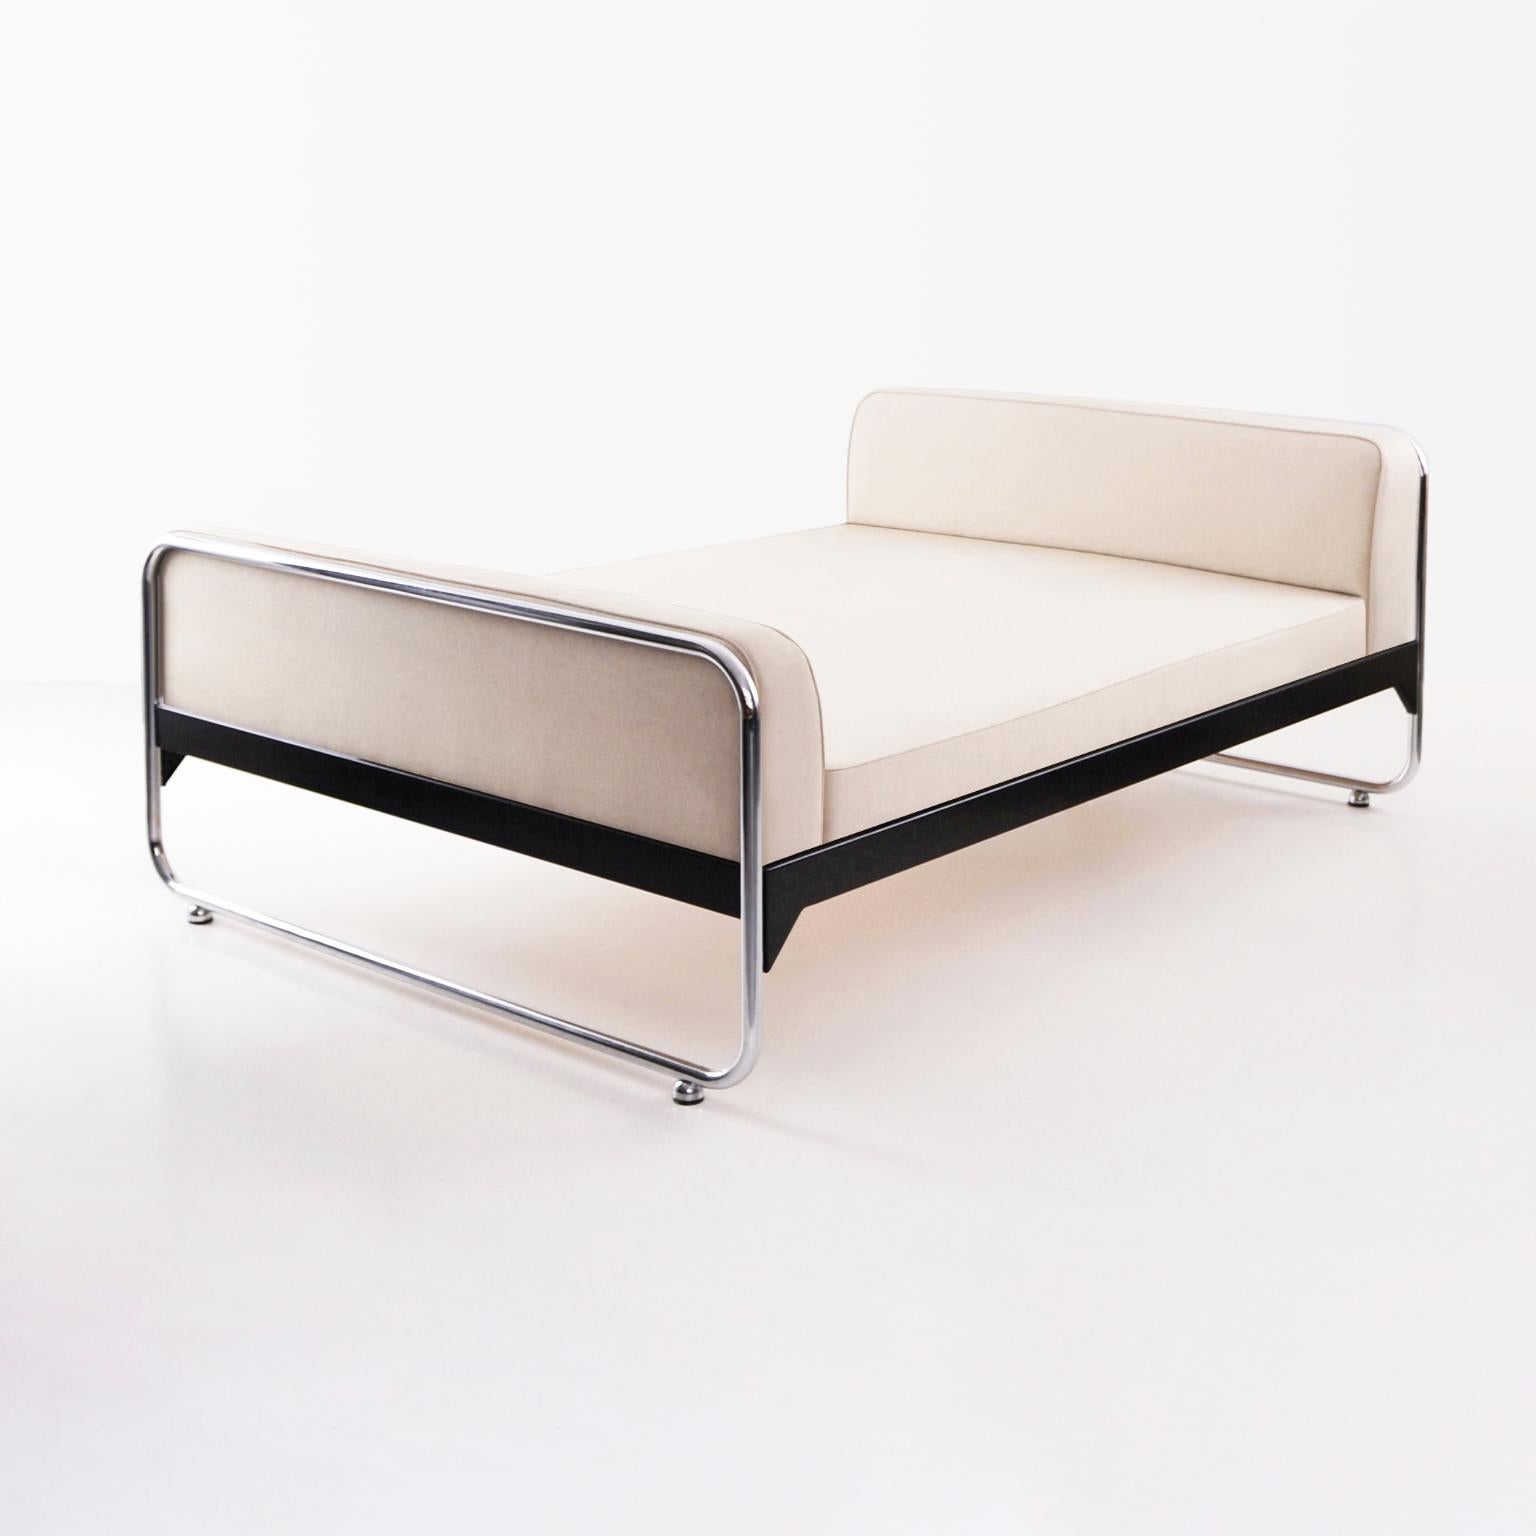 Made-to-measure modernist bed, chromium-plated tubular steel, lacquered metal frame and fabric upholstery. 

Disponible on request in different amounts und dimensions.
Production time: 7-8 weeks.